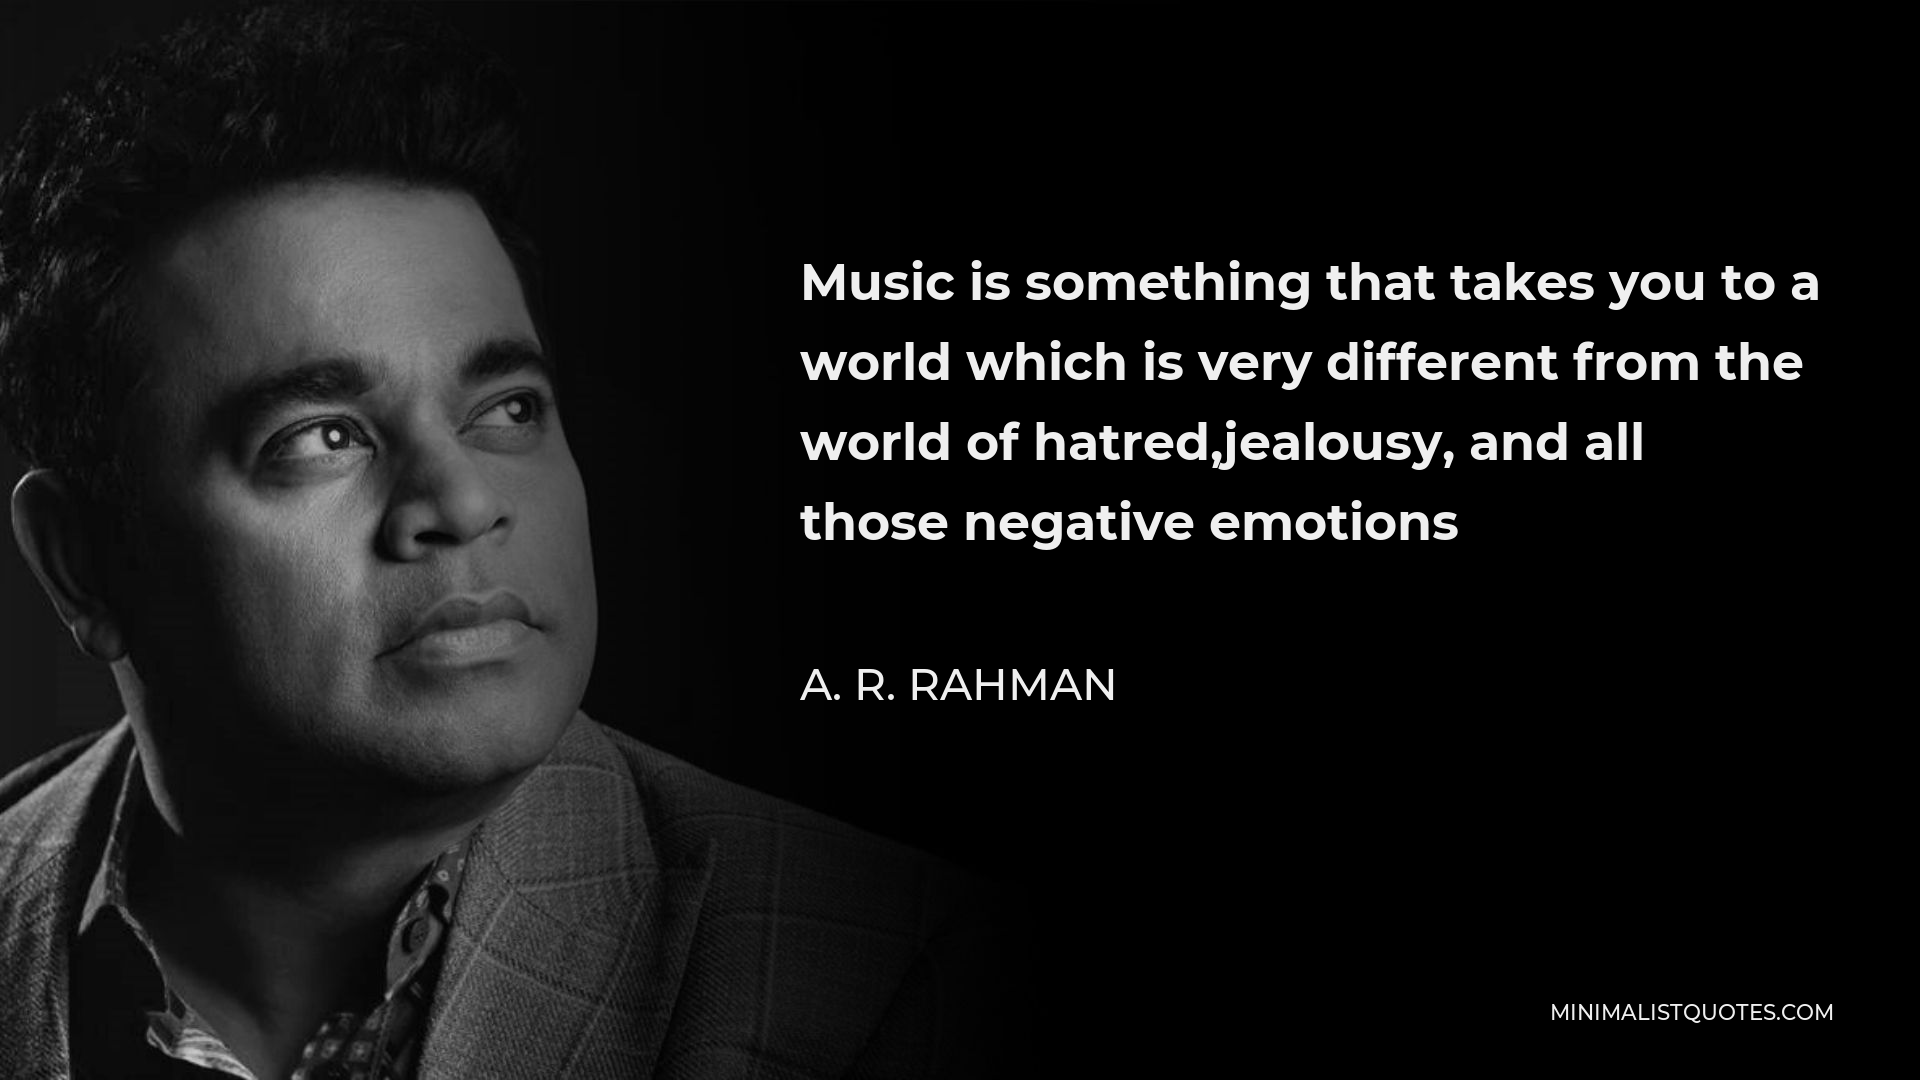 A. R. Rahman Quote - Music is something that takes you to a world which is very different from the world of hatred,jealousy, and all those negative emotions